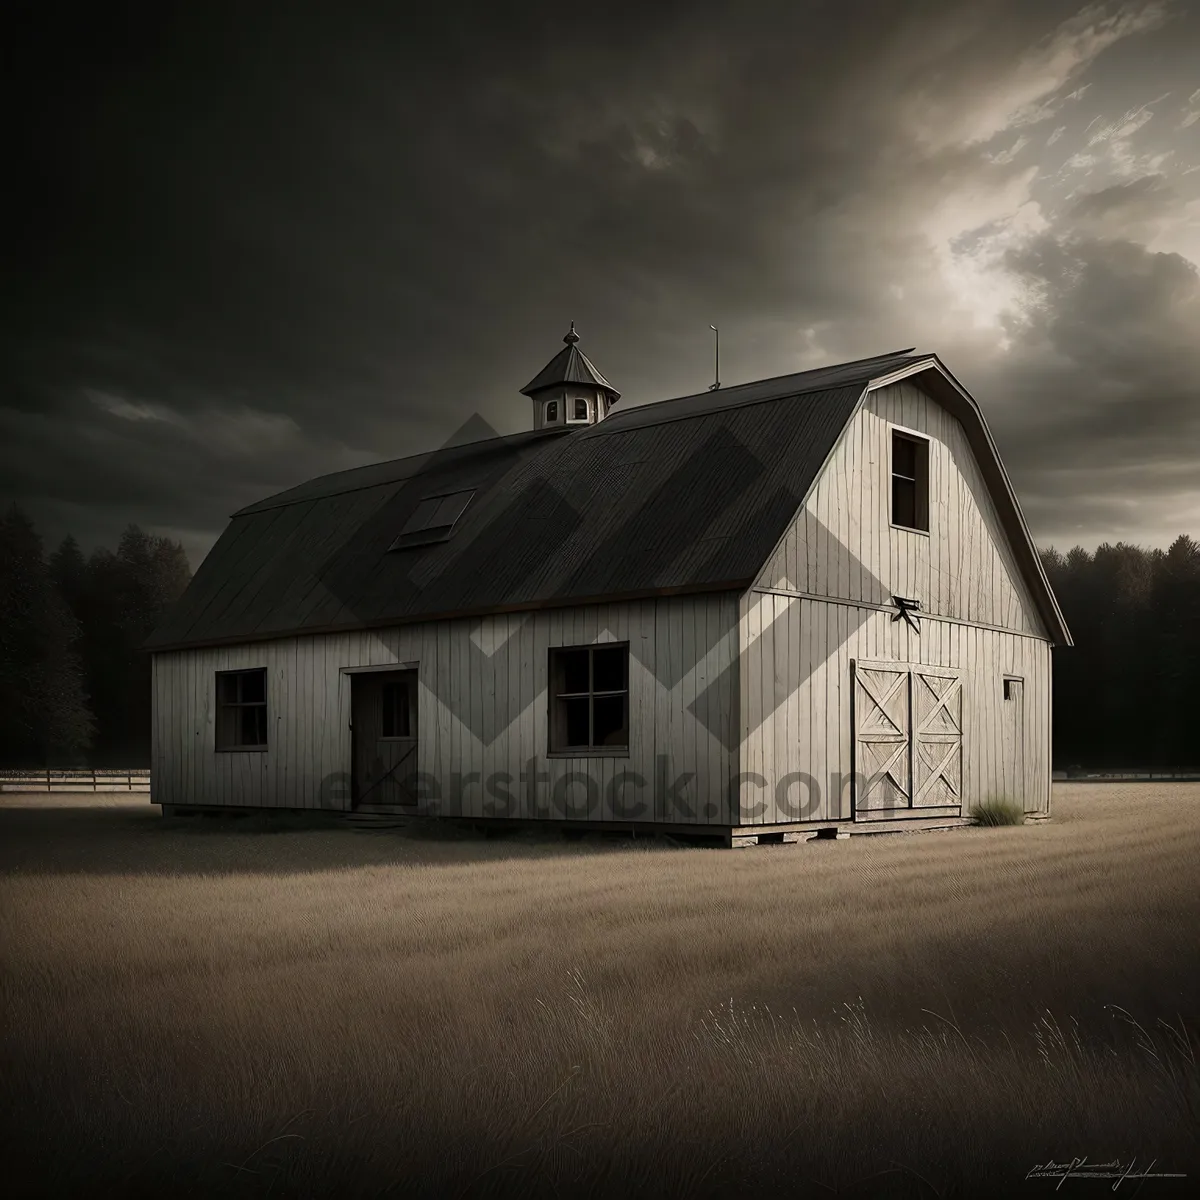 Picture of Old Rural Barn Amidst Serene Farm Landscape"
(Note: This is an example of a short name for an image based on the provided tags.)